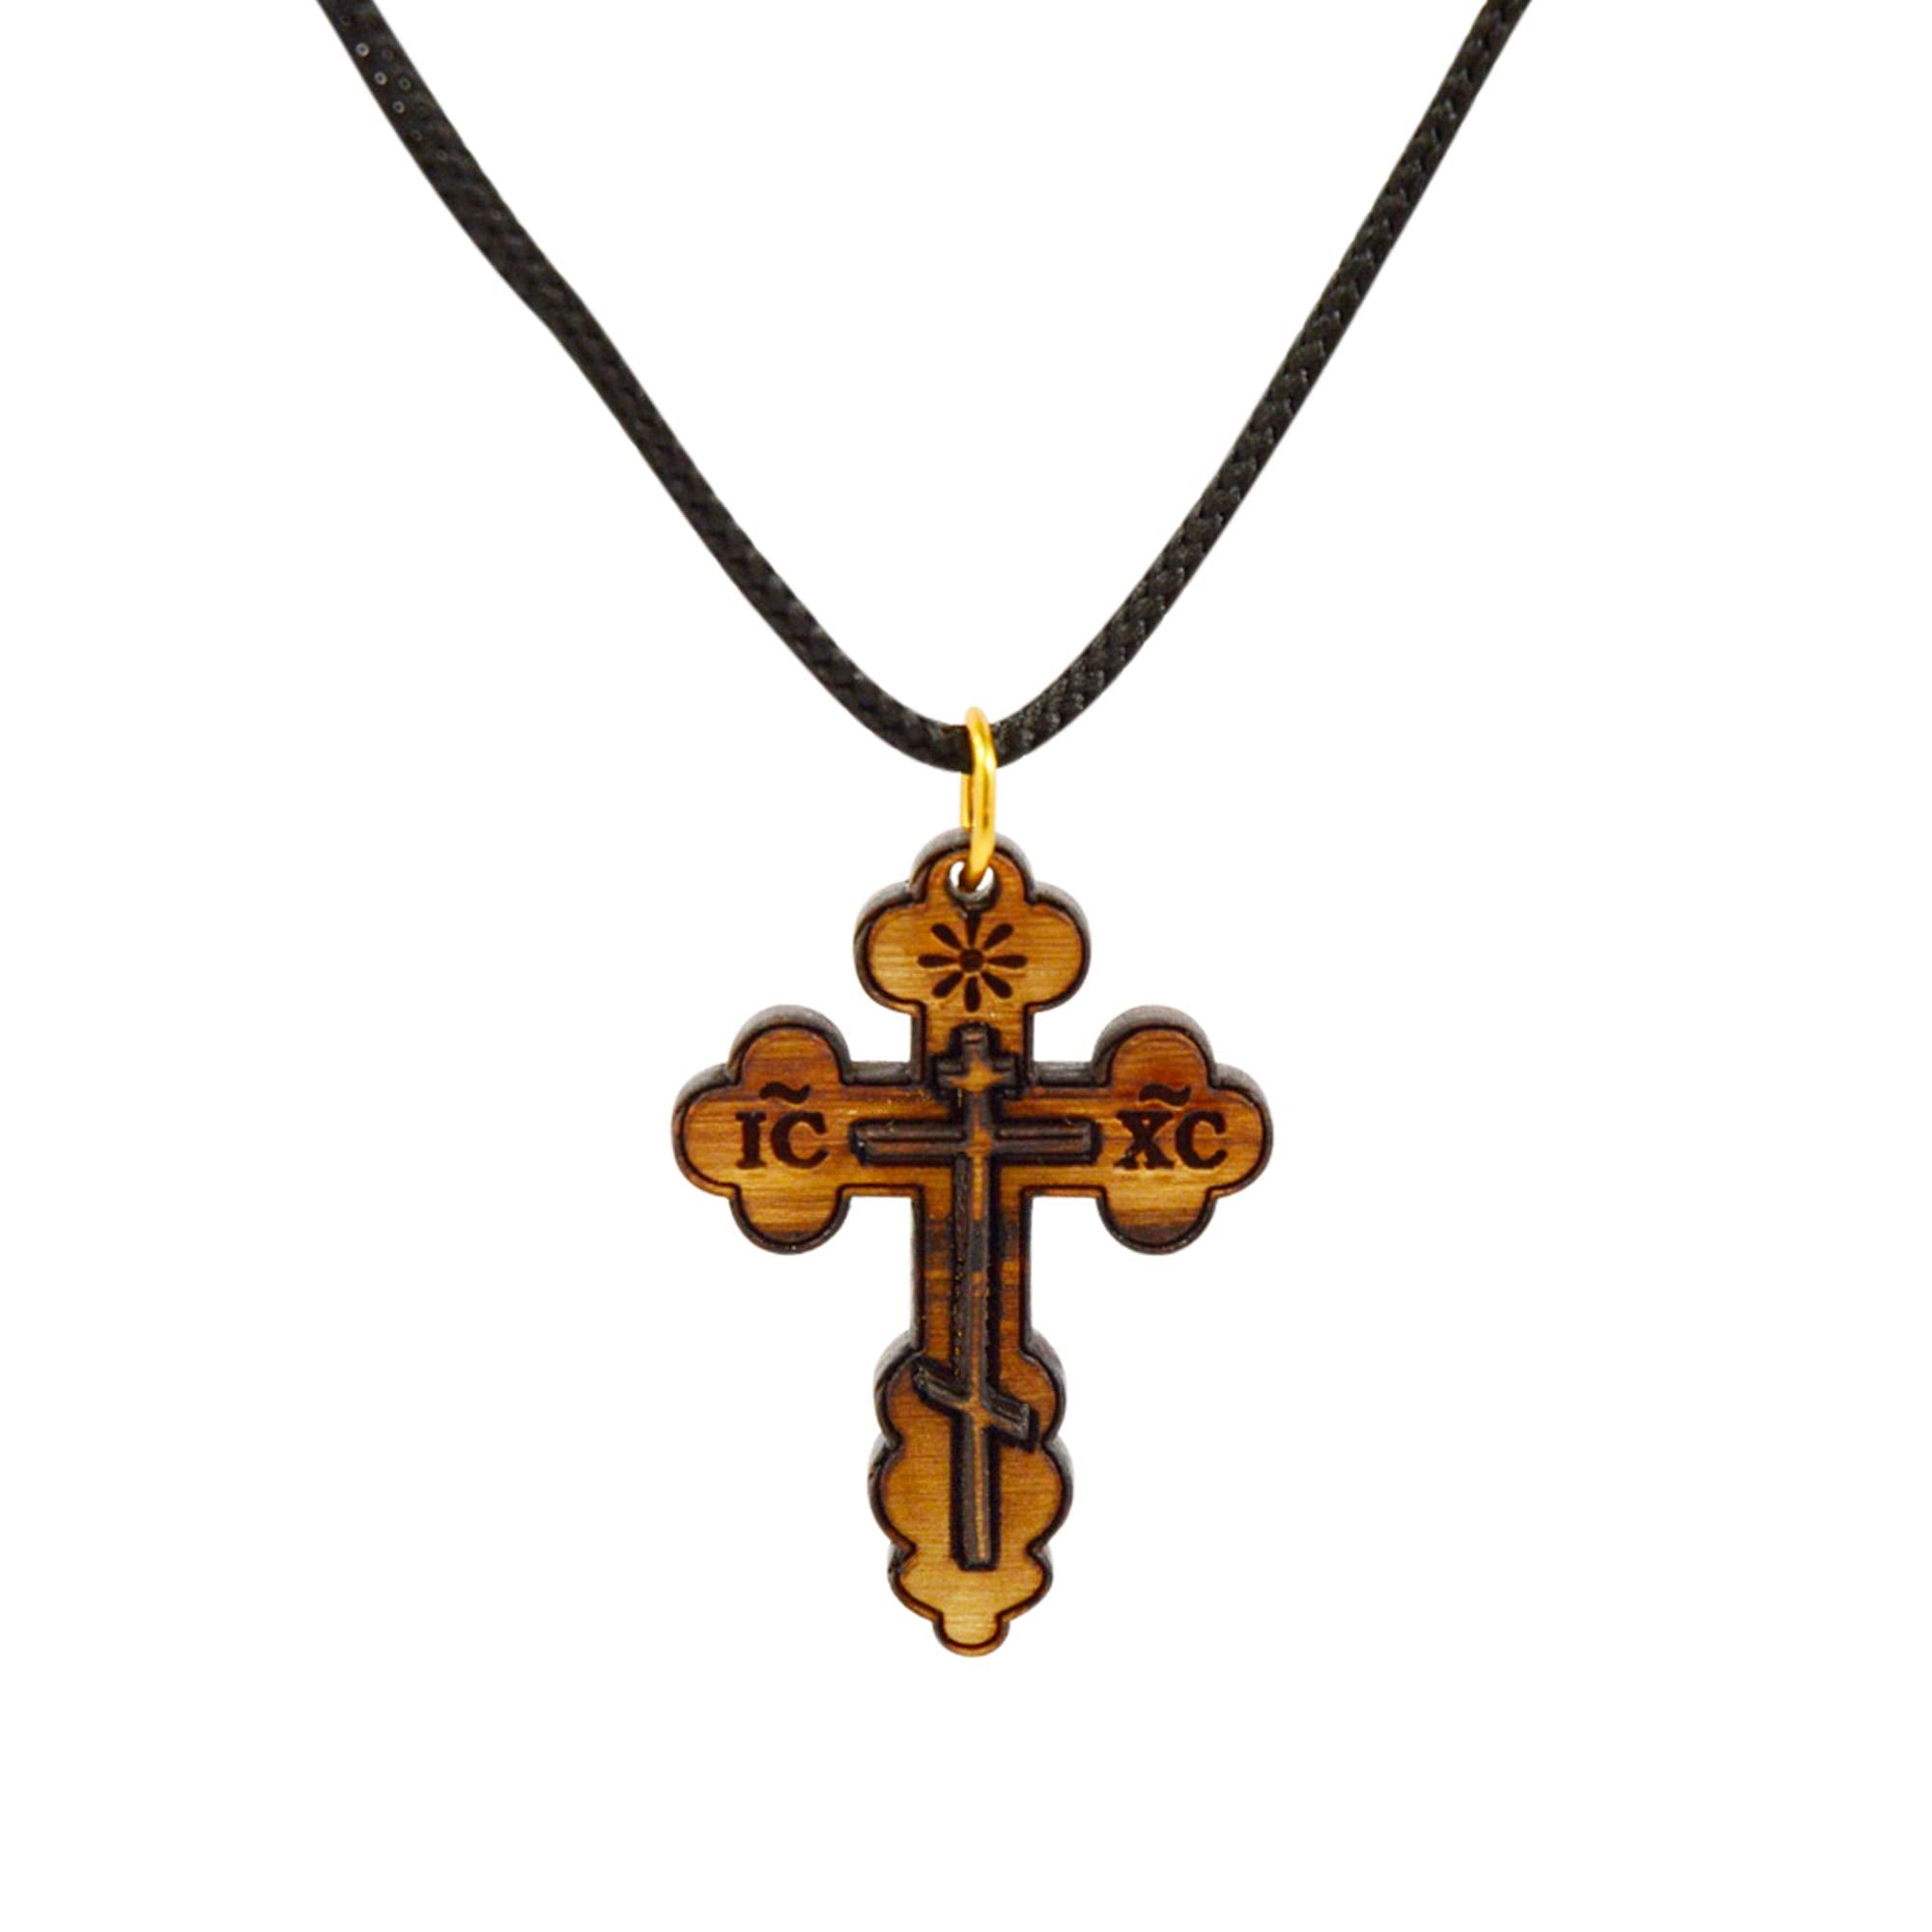 Authentic Wooden Eastern Orthodox Olive Wood Cross Necklace from Bethlehem - Real Olive Wood Christian Jewellery for Men and Women - Certificate of Authenticity and Cotton Pouch Included